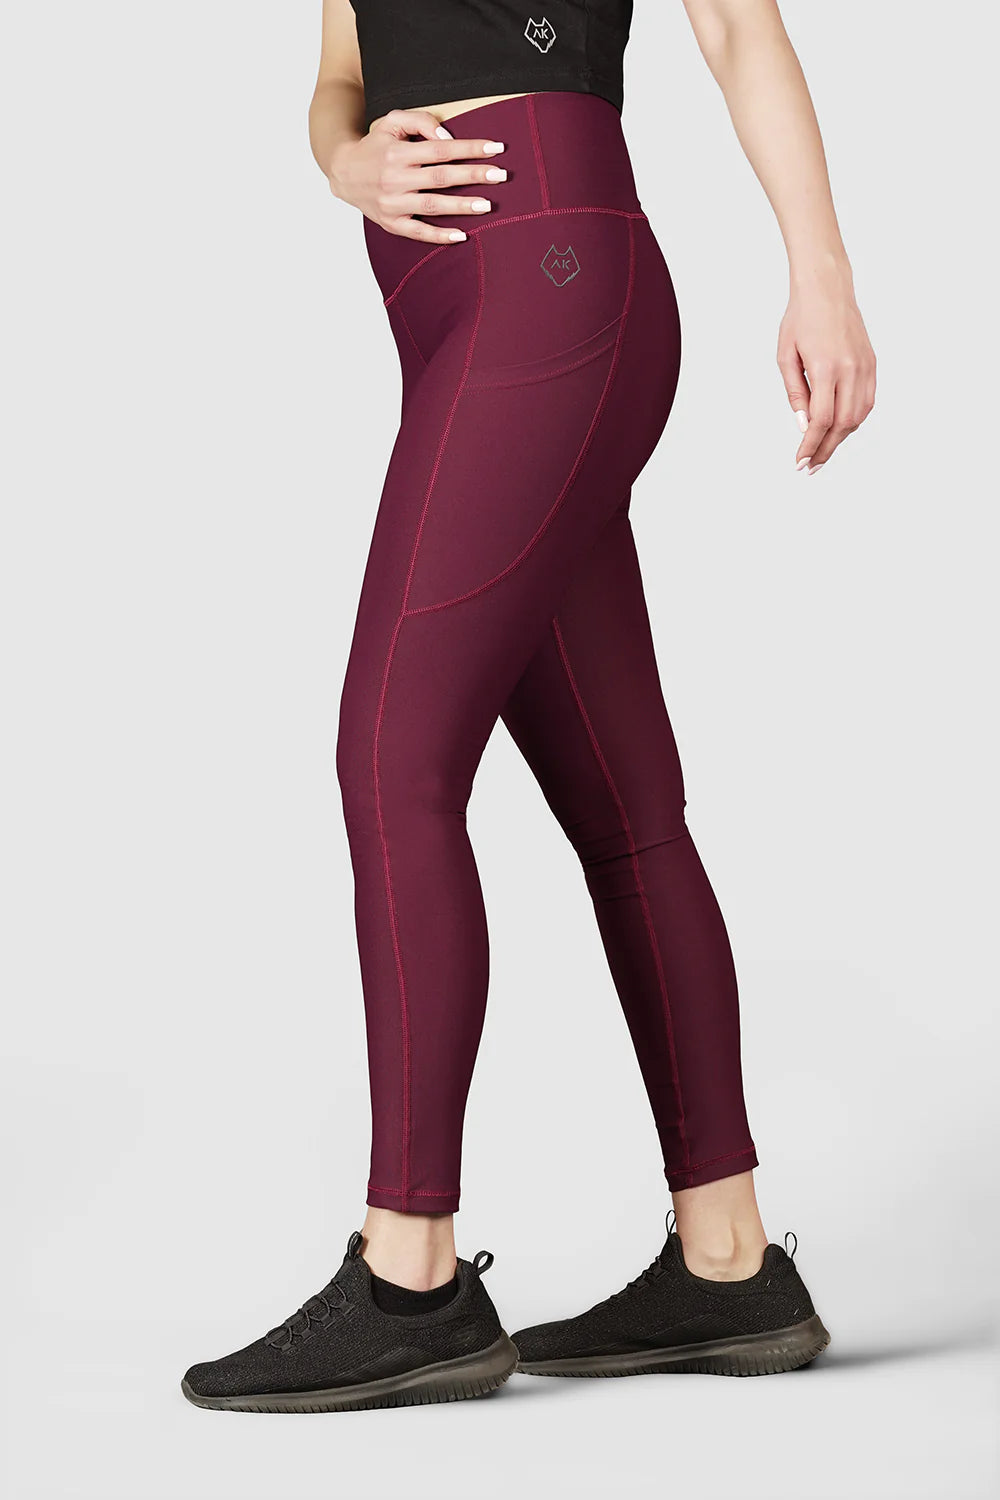 Where to Buy Cheap Leggings Online – Shopdrill is The One Stop Solution |  Affordable leggings, Cheap leggings, Fashion over 50 blog